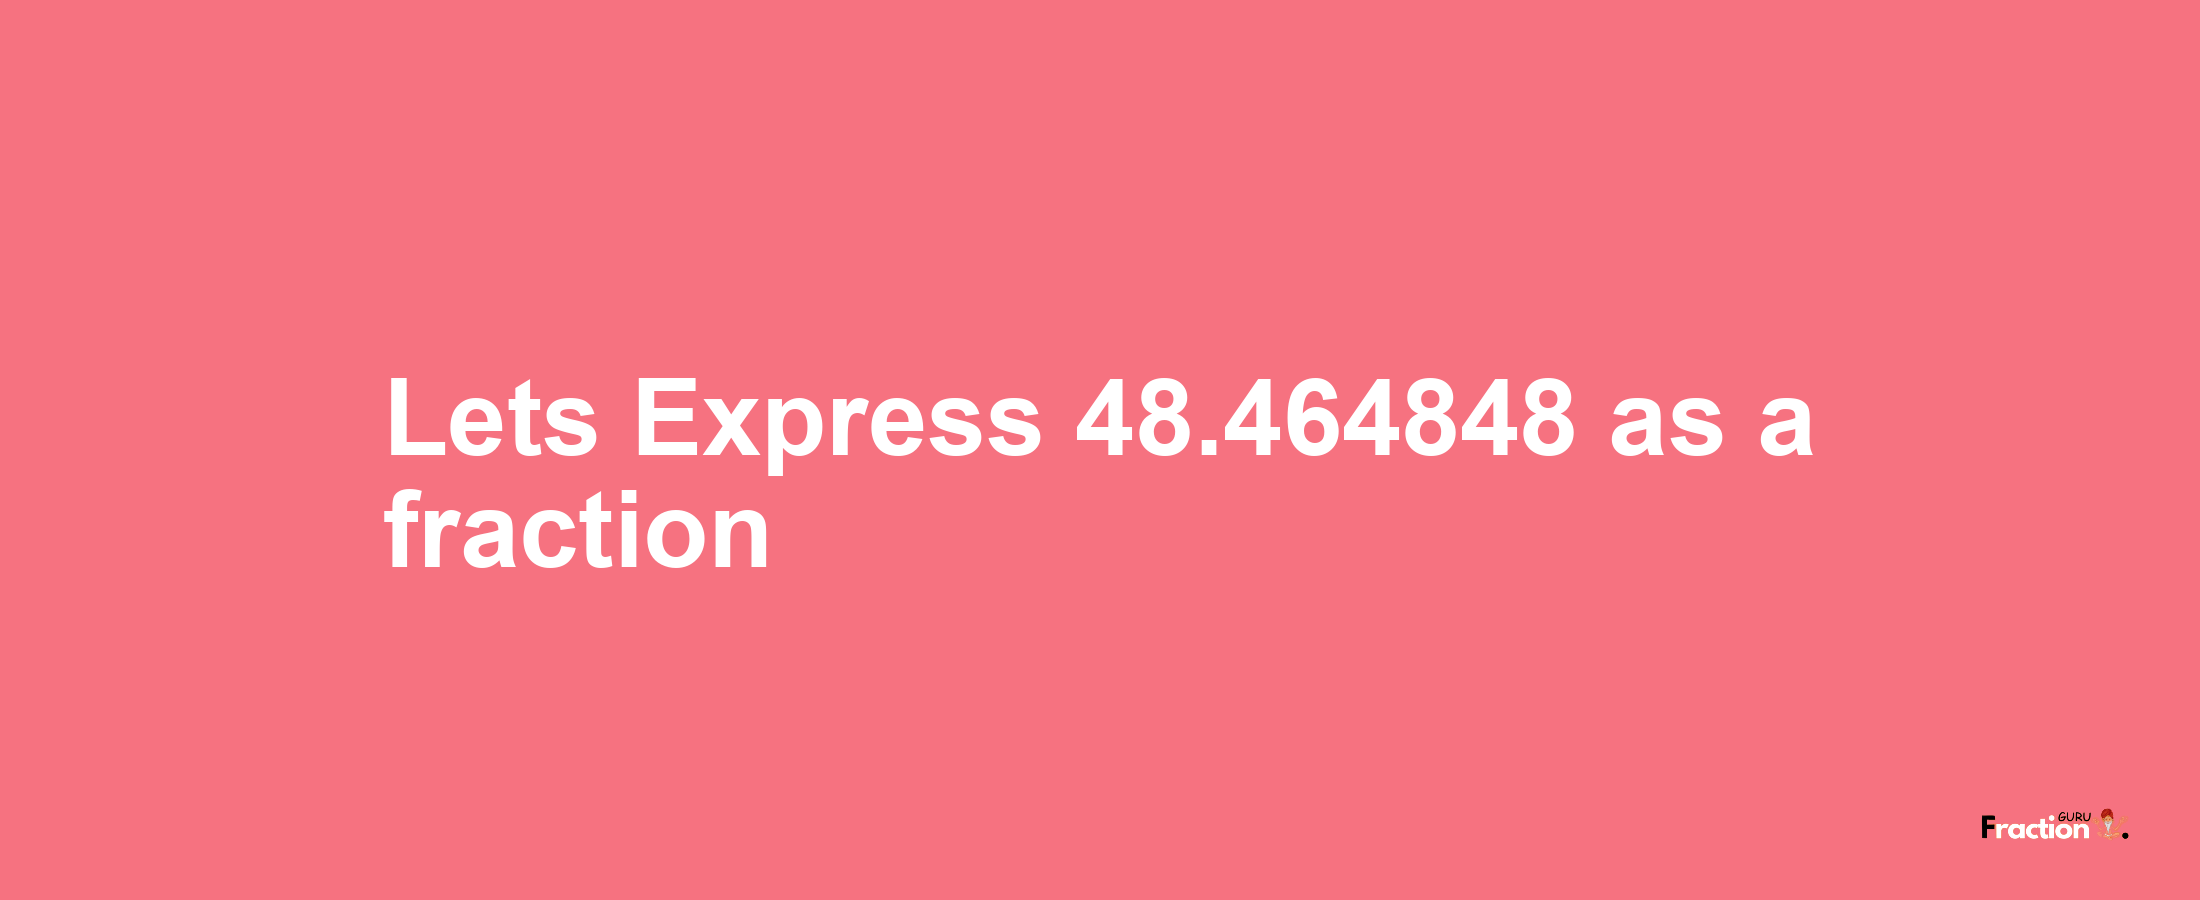 Lets Express 48.464848 as afraction